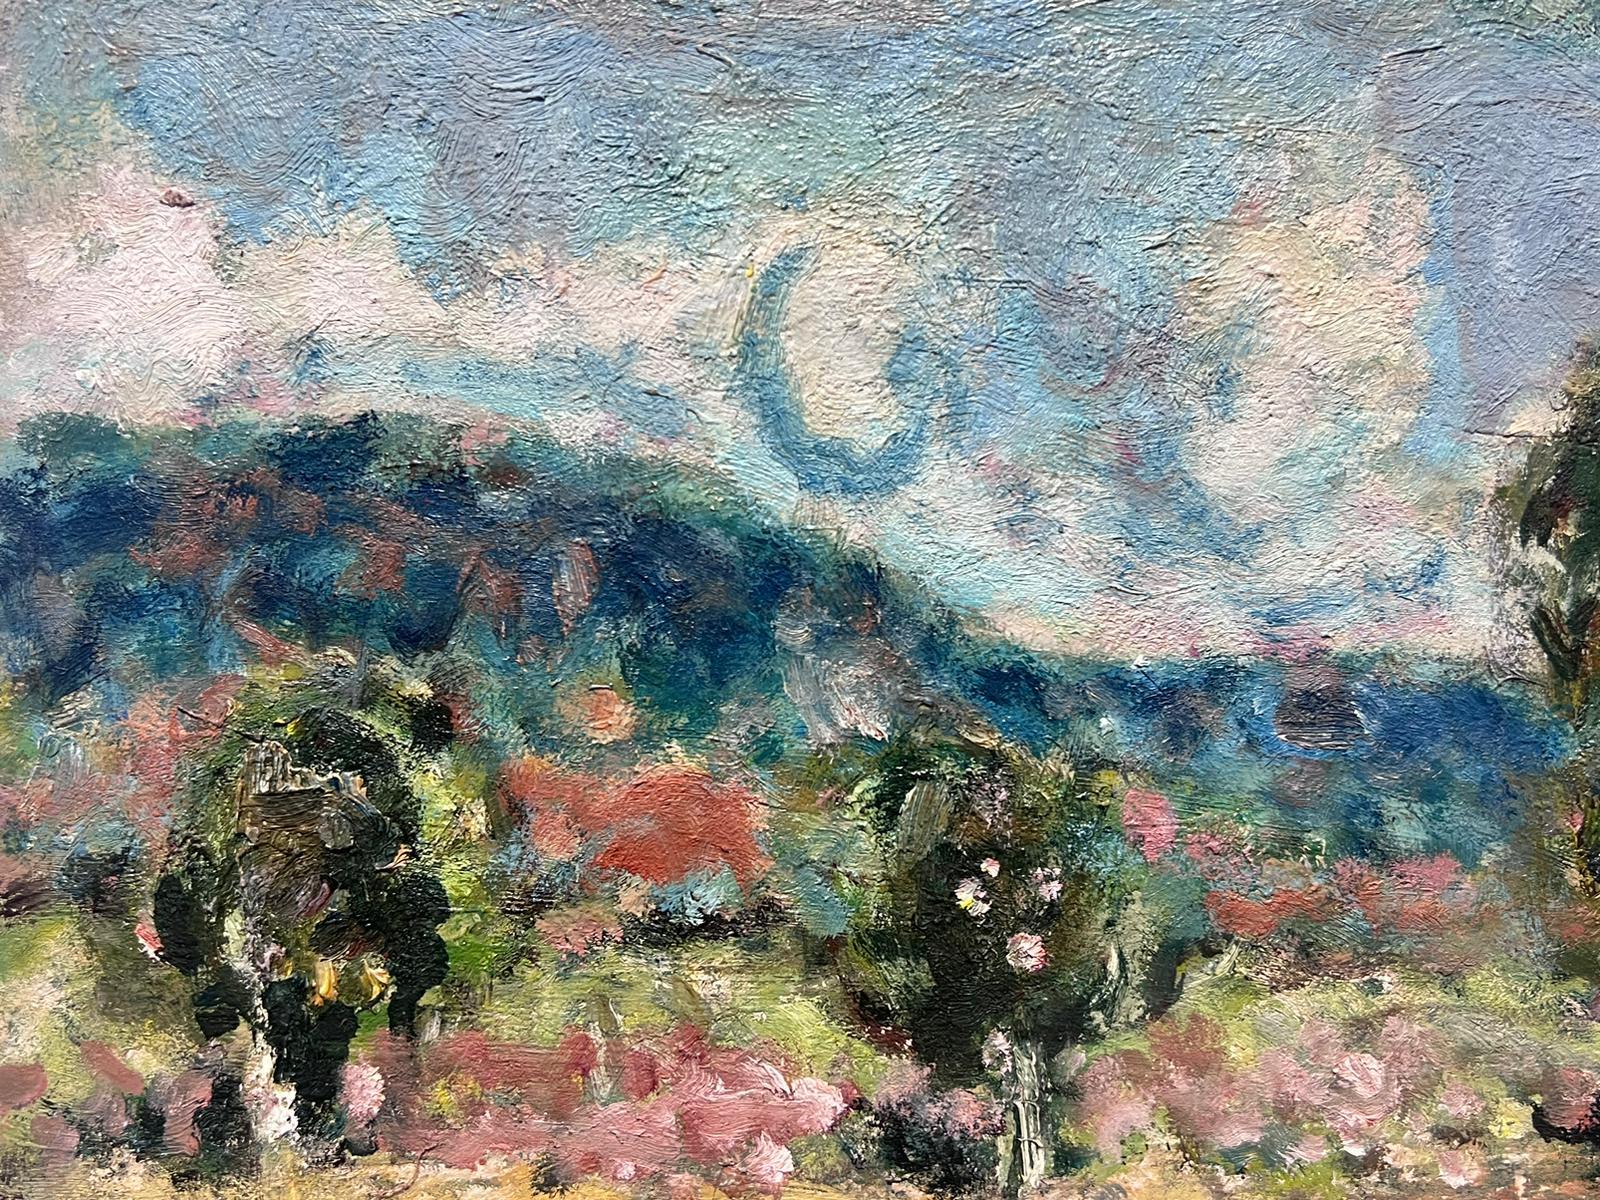 Fluffy Clouds over the landscape
signed oil on board, unframed
board: 9.75 x 13 inches
inscribed verso
dated 1958
provenance: private collection, France
condition: very good and sound condition